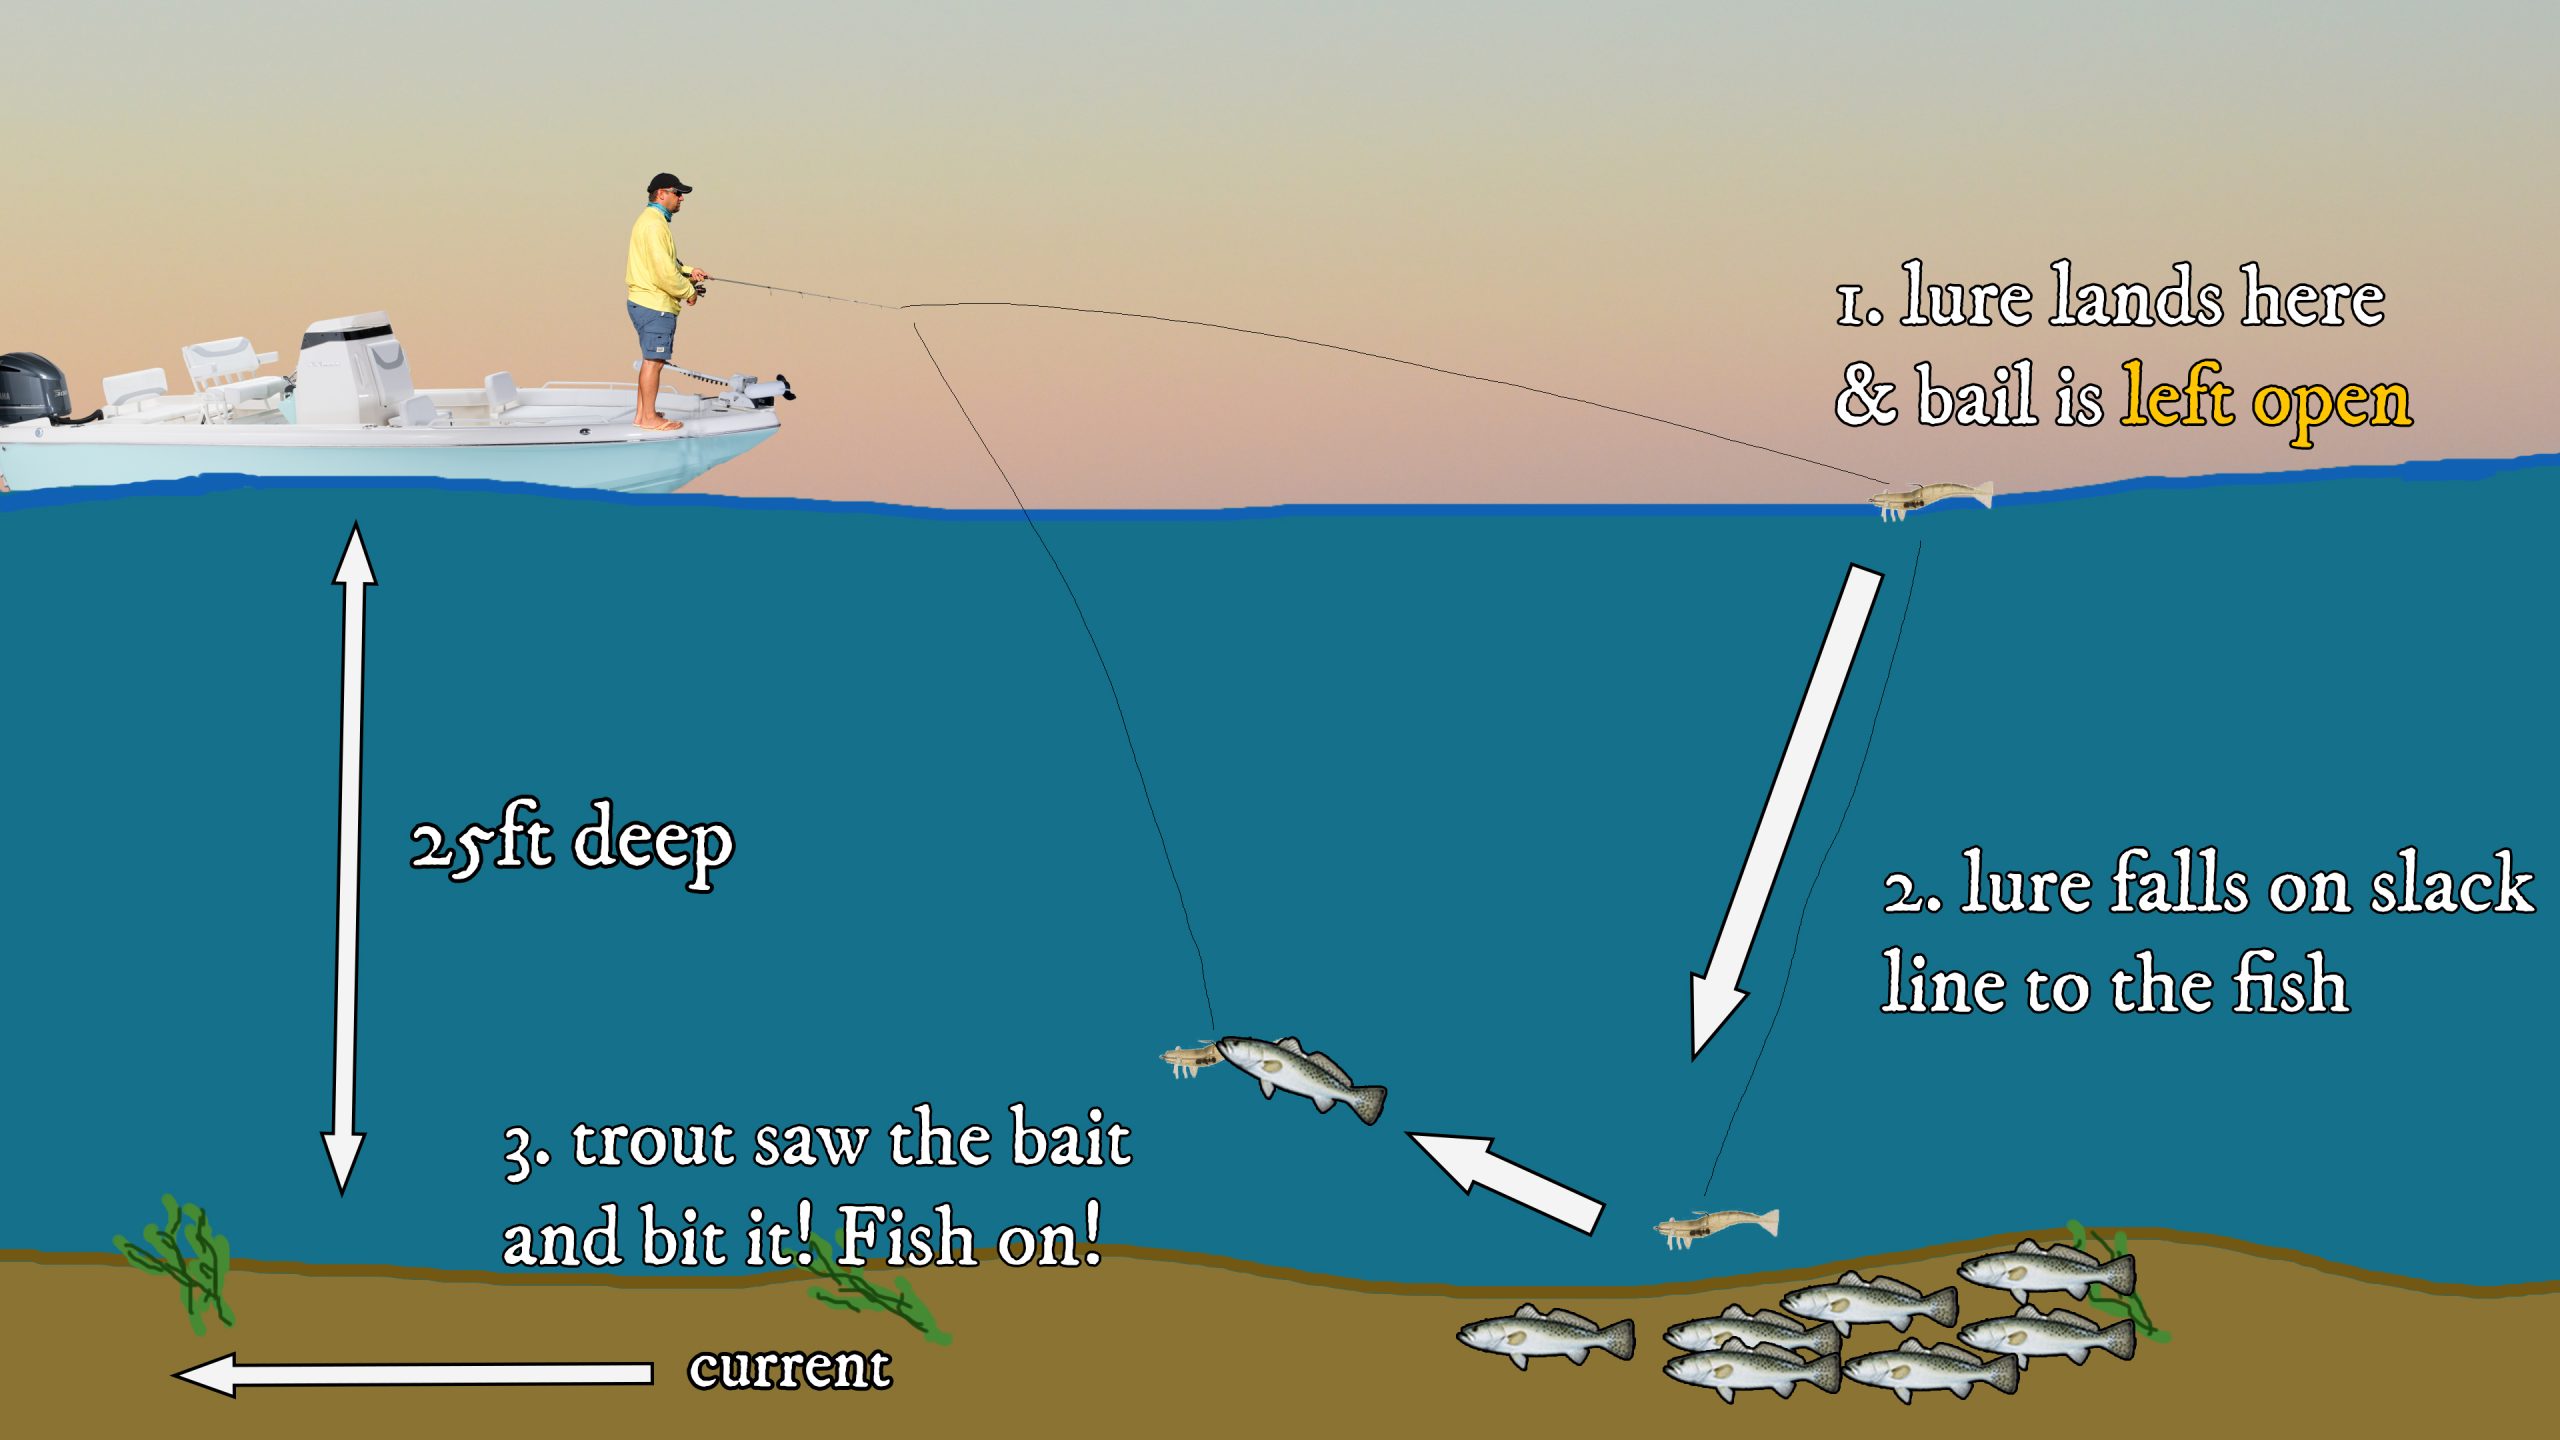 slack line method to fish for speckled trout in deep water